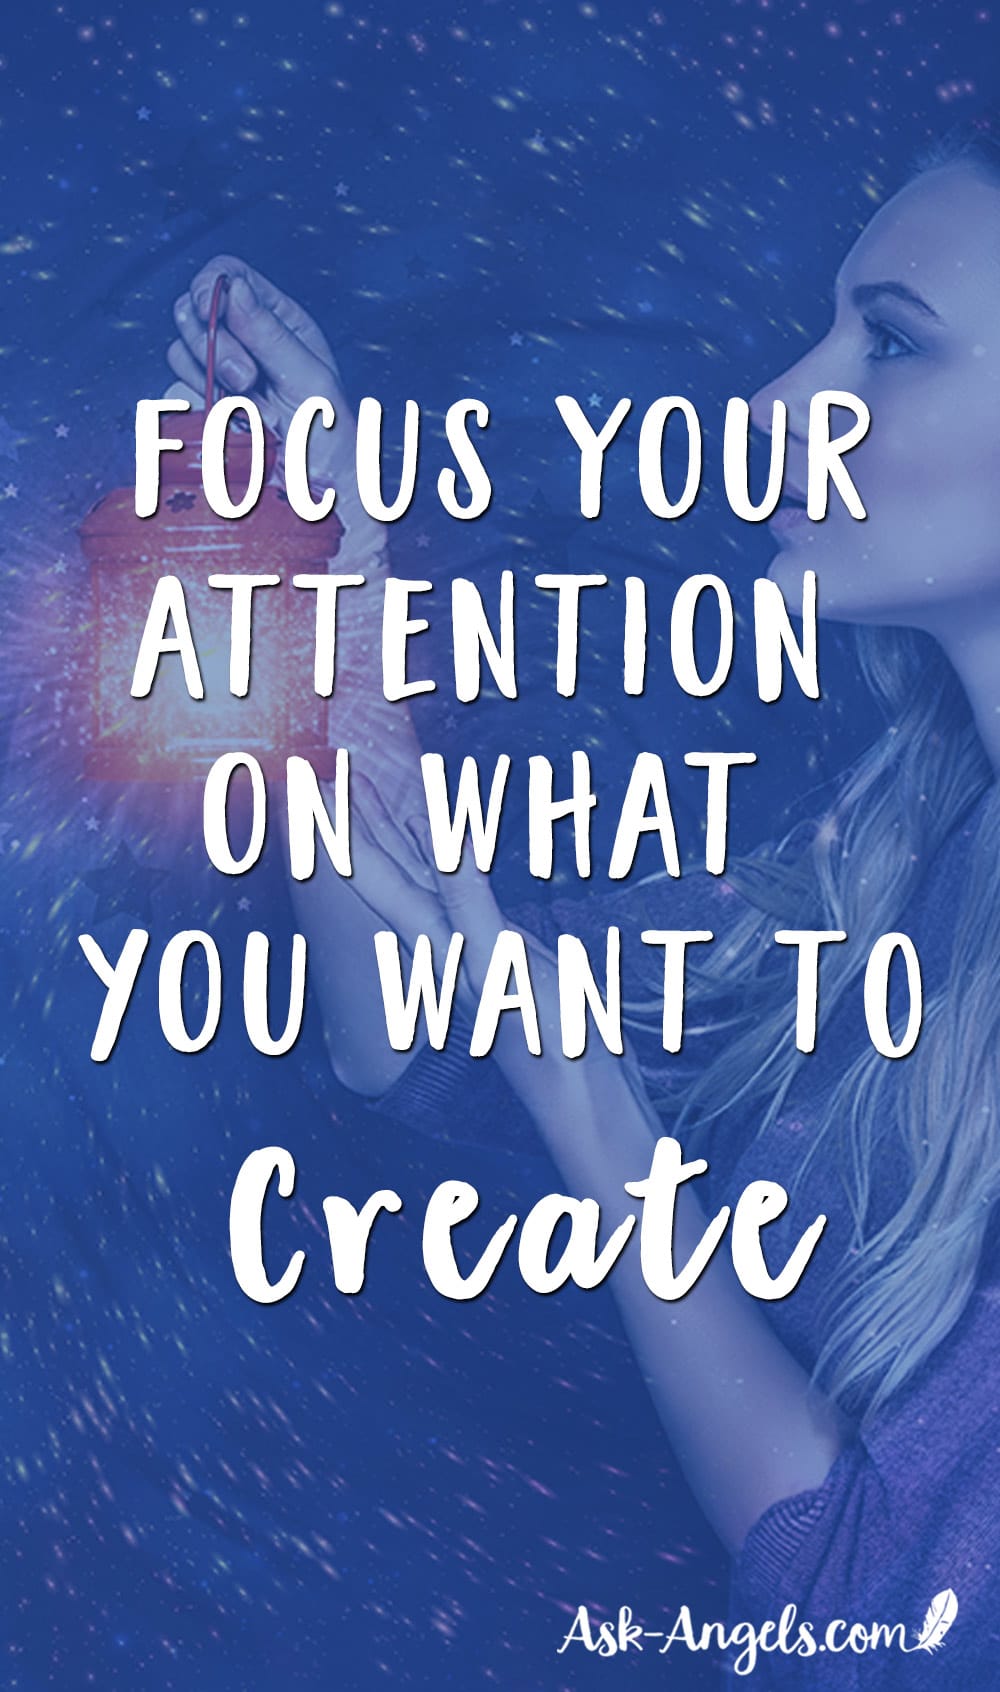 Focus Your Attention On What You Want to Create